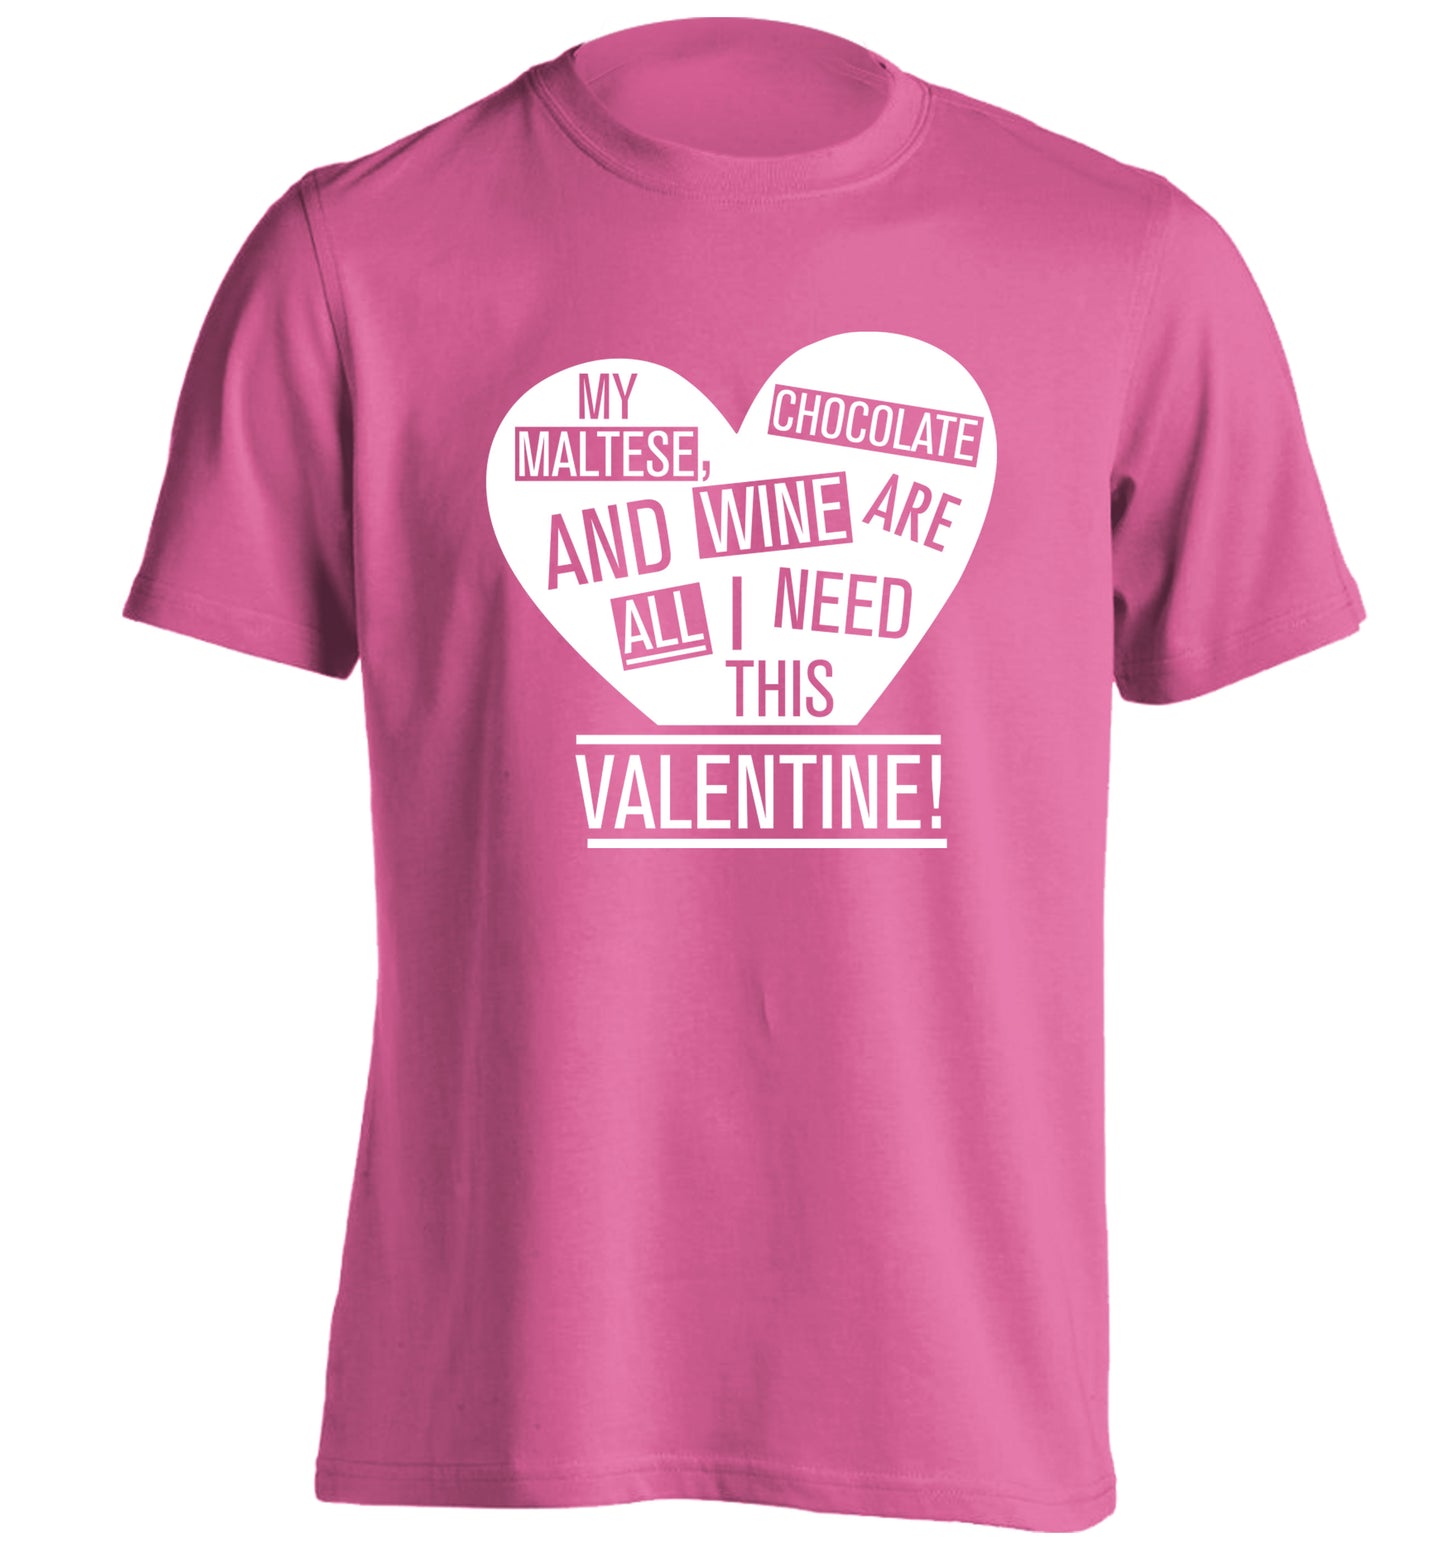 My maltese, chocolate and wine are all I need this valentine! adults unisex pink Tshirt 2XL